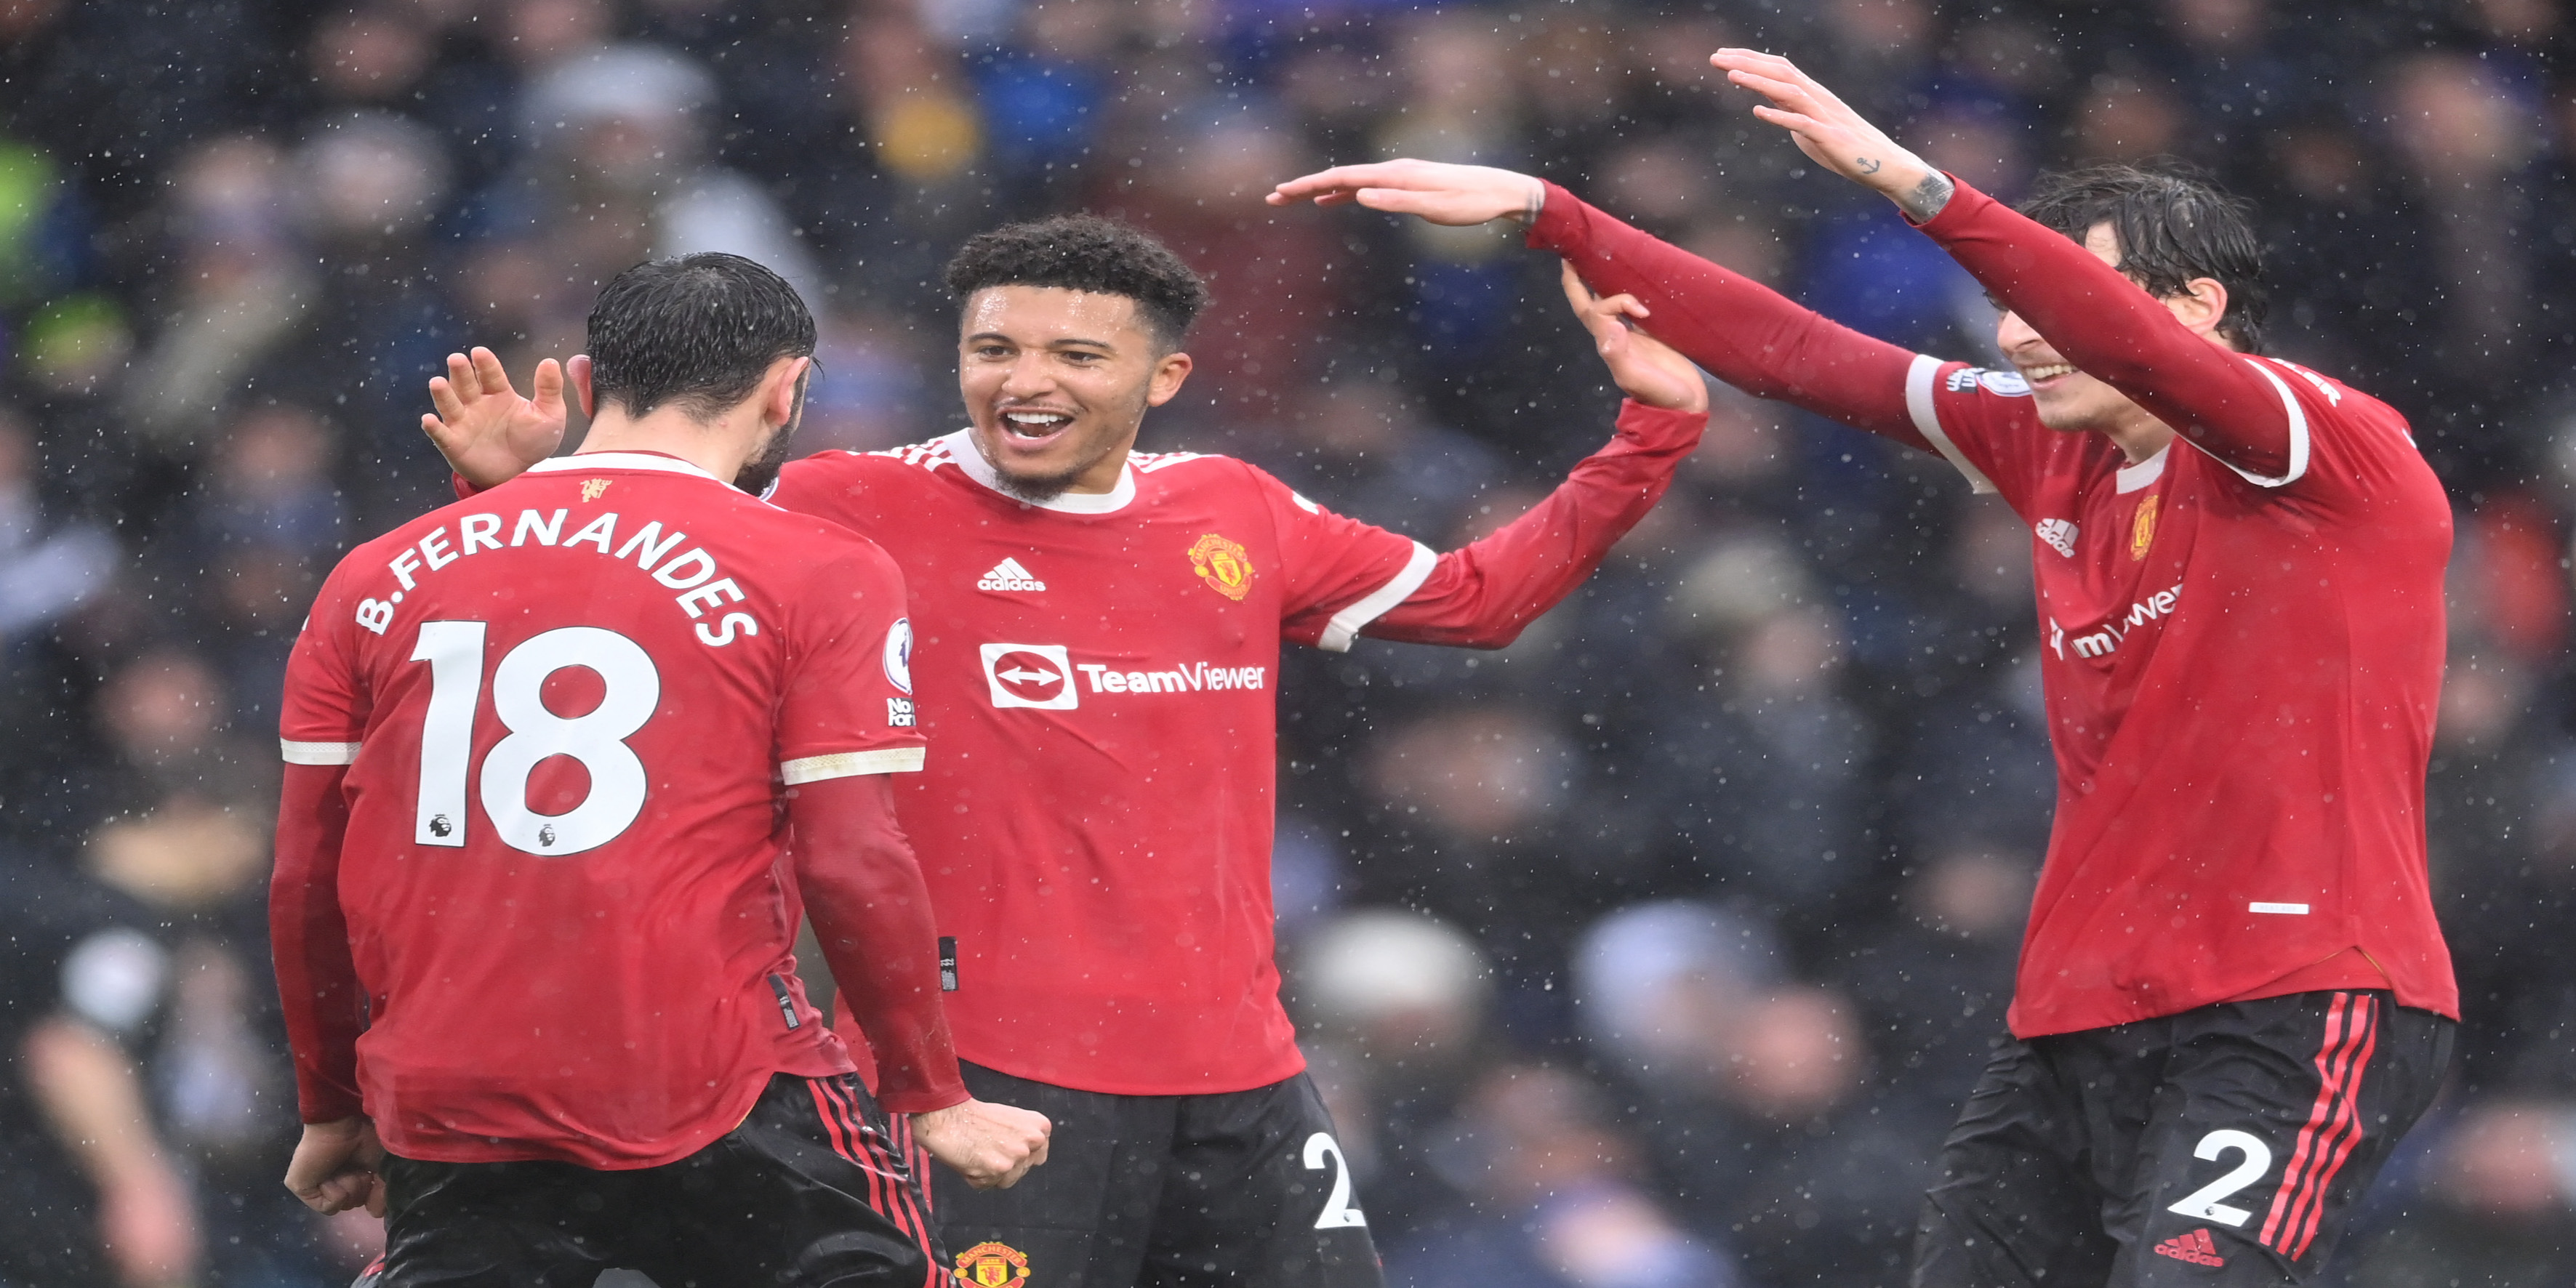 Pundit claims that Manchester United star would fit into Liverpool’s system ‘perfectly’ after slow start to Old Trafford career